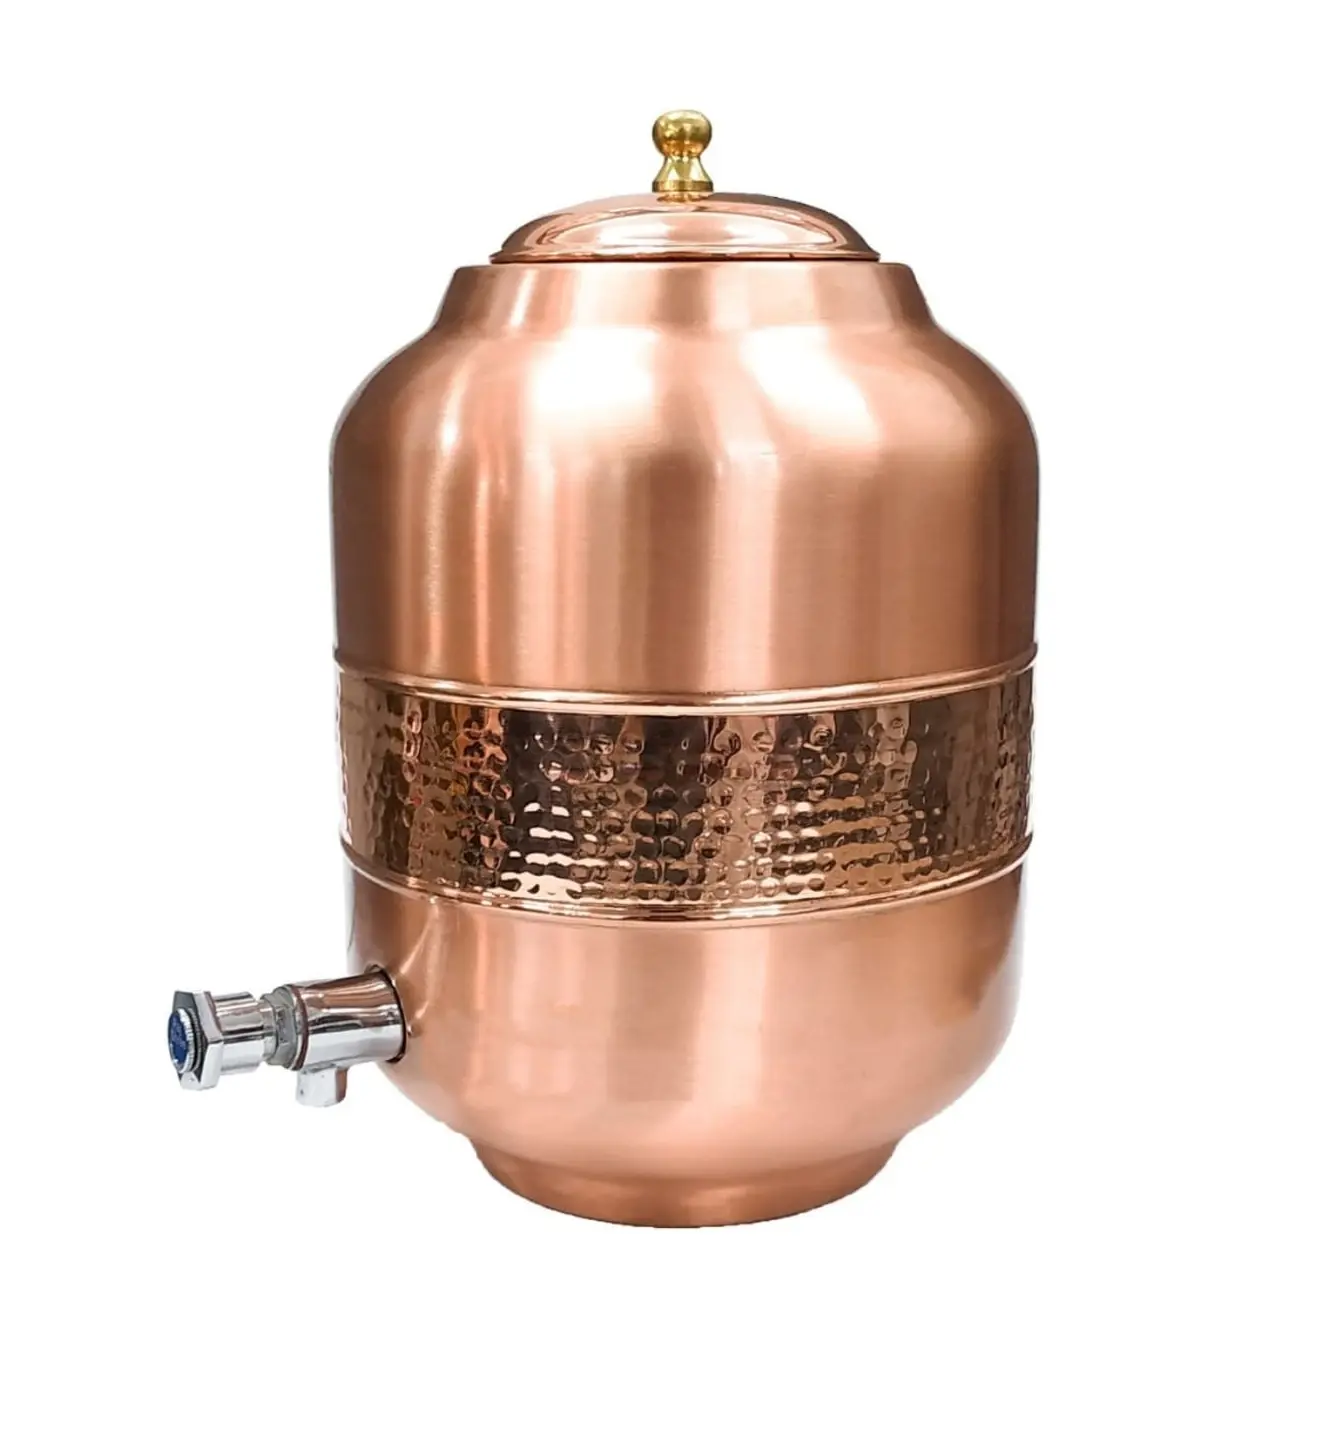 Top Exporter of Copper Water Pitcher kitchen & tabletop Items for Business and Promotional Gifts